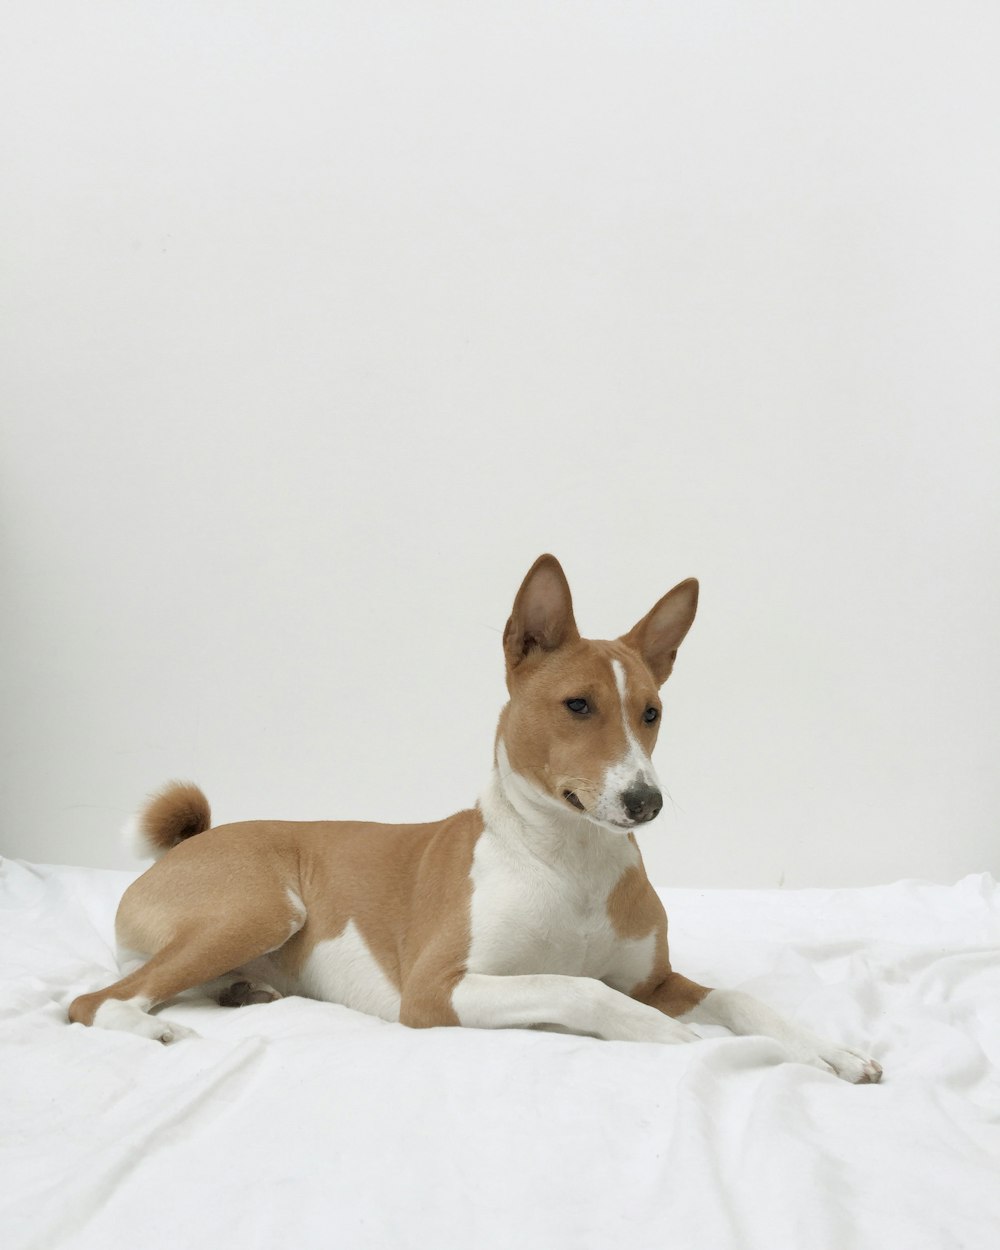 A brown and white dog sitting on a white blanket.